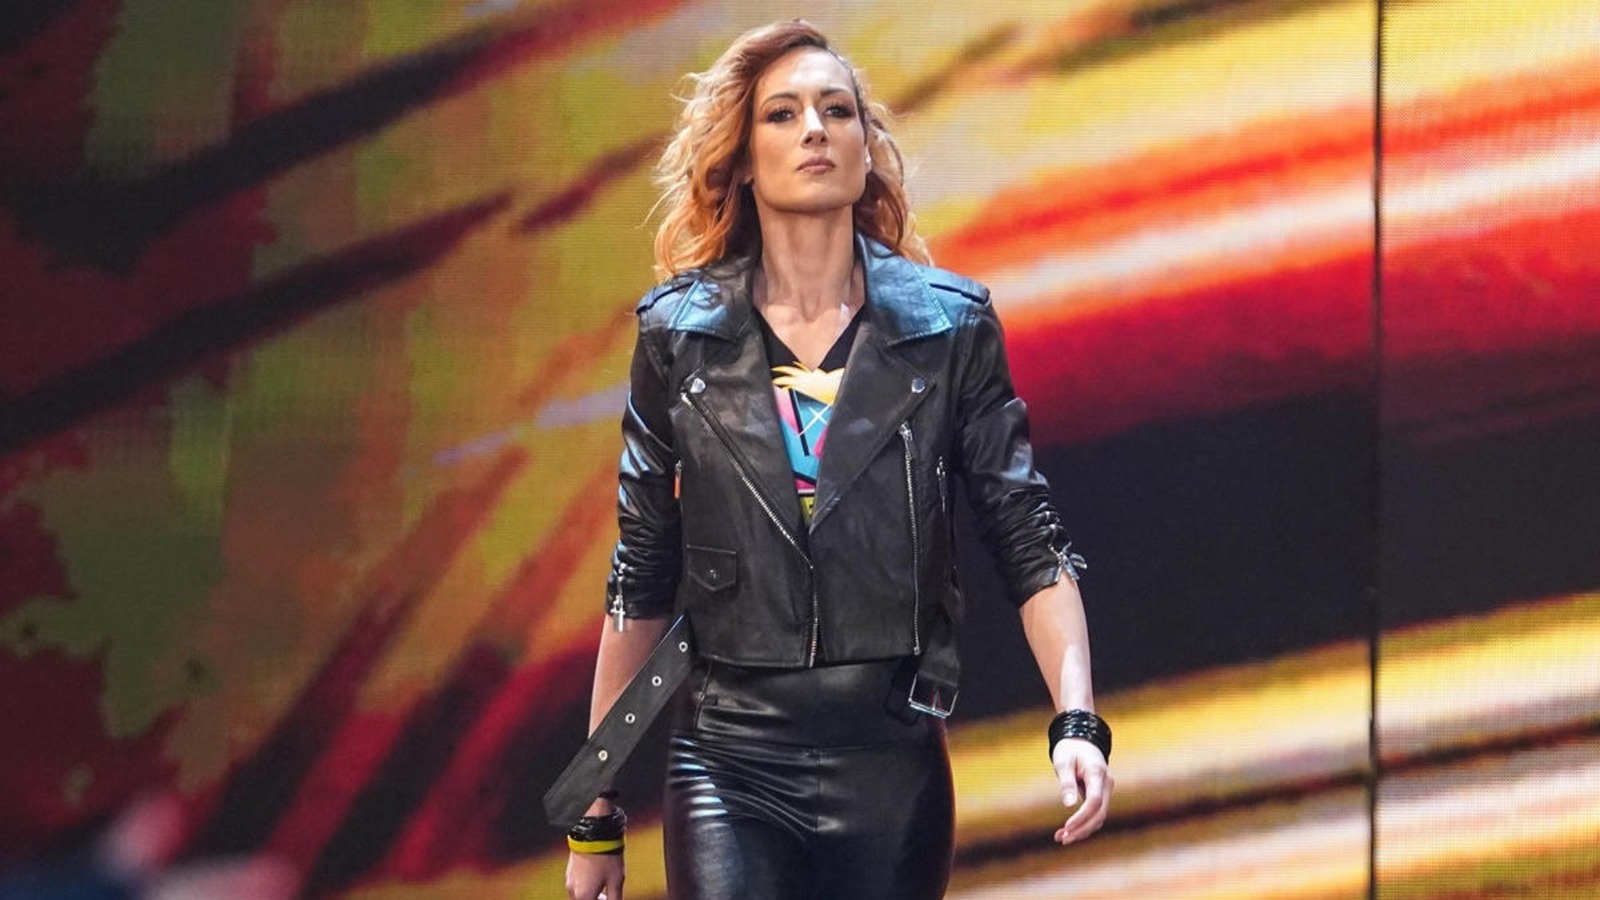 I Haven't Been Champion Yet - Becky Lynch Teasing WWE NXT Return - SE  Scoops